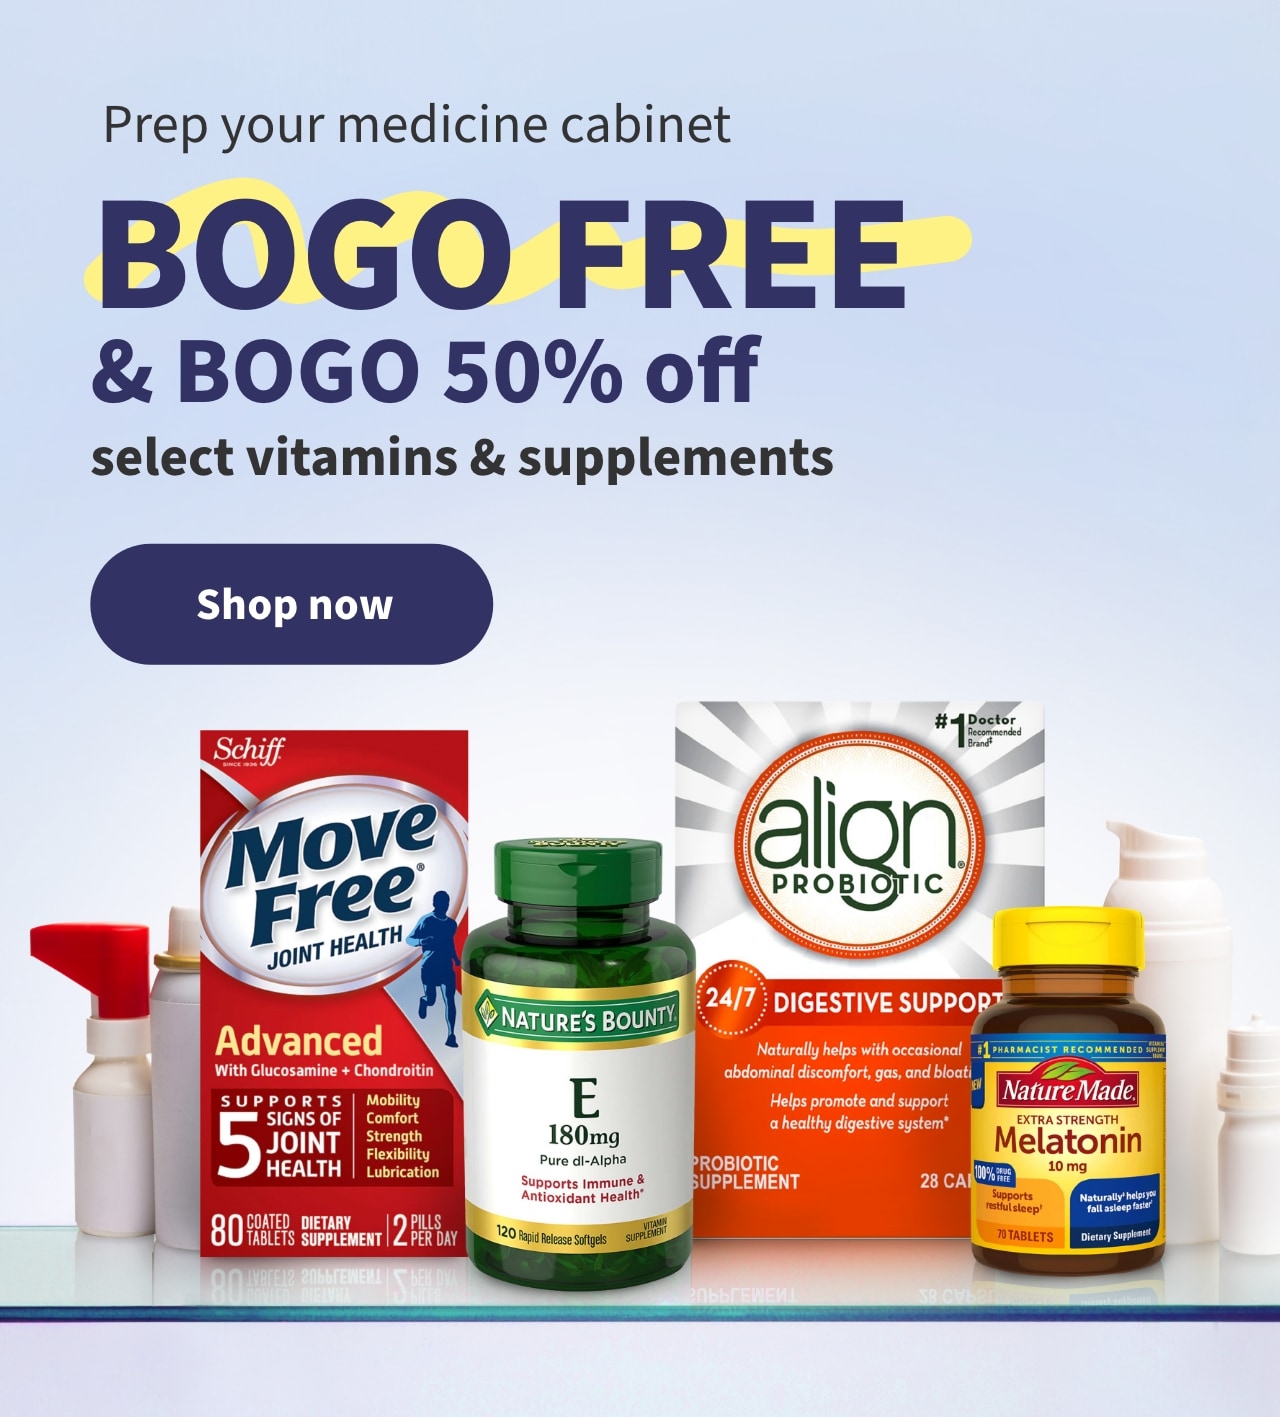 Prep your medicine cabinet BOGO FREE BOGO 50% off select vitamins supplements NATURE's BO! Advanced With Glucosamine Chondroitin abdominal discomfort, gas, and. bkwmw L N E Helps promote and support NatureMade, Sl R e a healthy digestive system EXTRA STRENGTH, s 180mg Melatonin Pure AV HEALTH vLubrication e ol Supports Immune Antioxidant Health COATED DIETARY PILLS Bomms i 2 TRl 205t st TR 